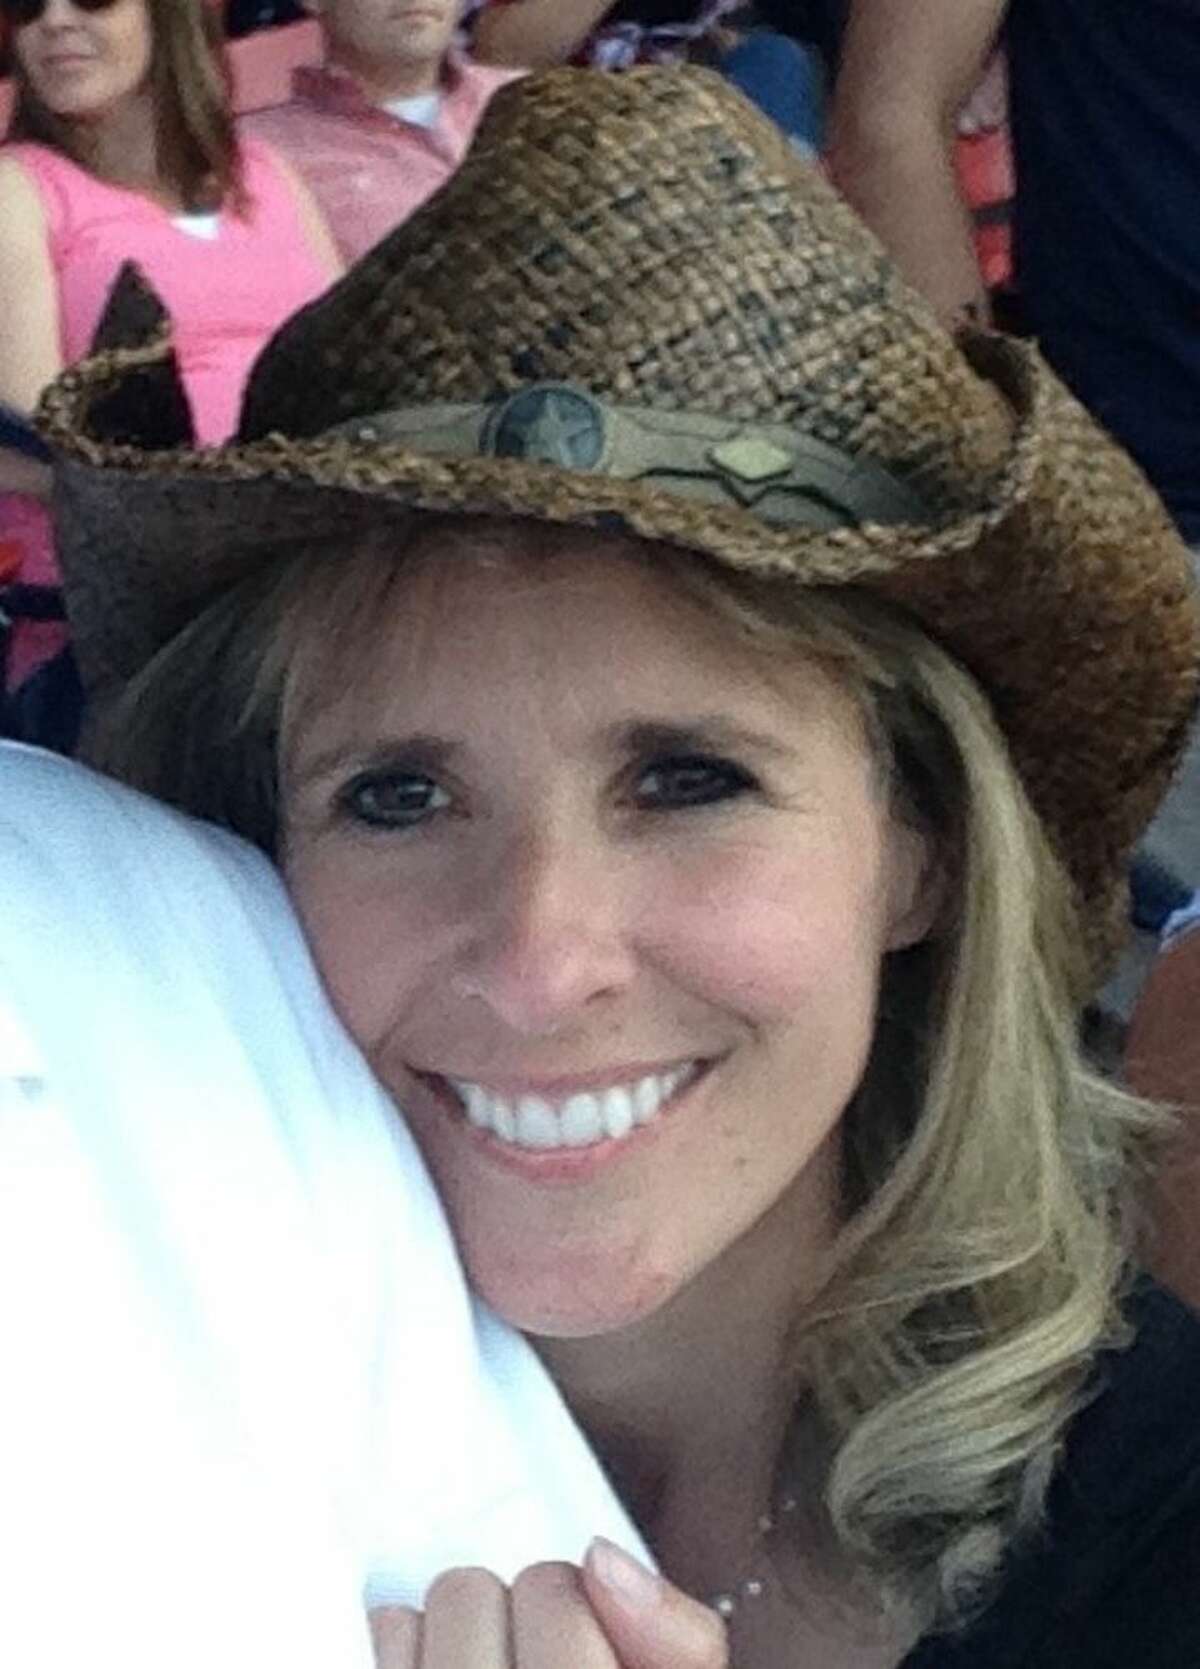 Tonya Carpenter is seen in an undated photo provided by her family. Carpenter, 44, of Paxton, Mass., who was hit by a broken bat at Fenway Park during a game between the Oakland Athletics and the Boston Red Sox on Friday night, remained in serious condition Sunday.